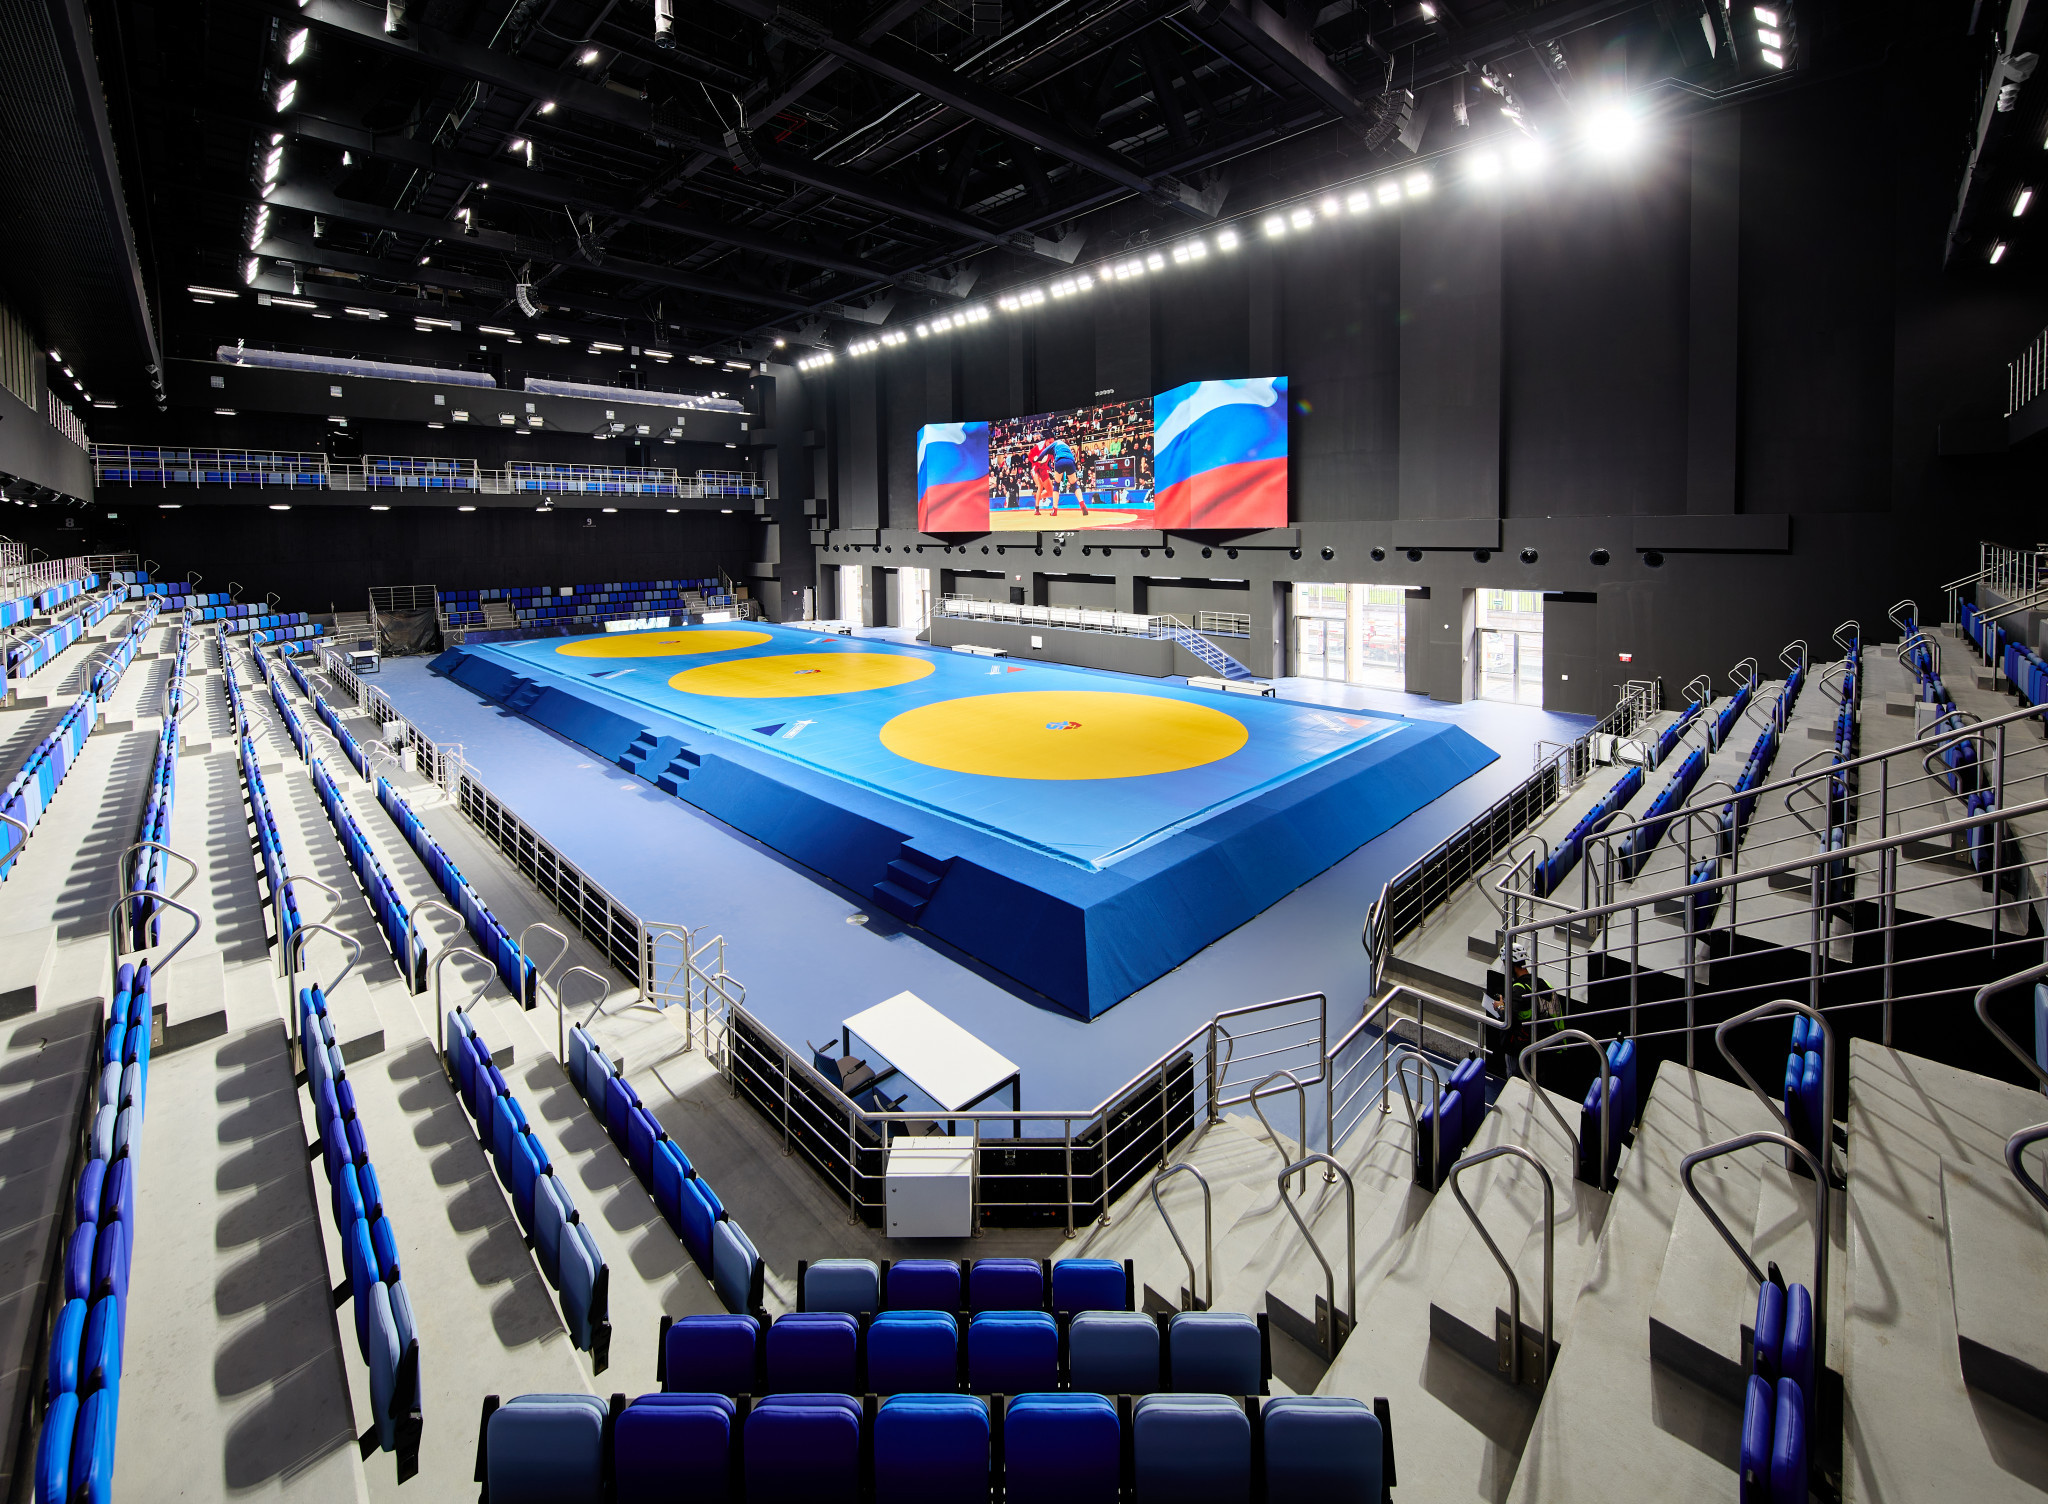 The competition hall at the International Sambo Center in Moscow ©FIAS